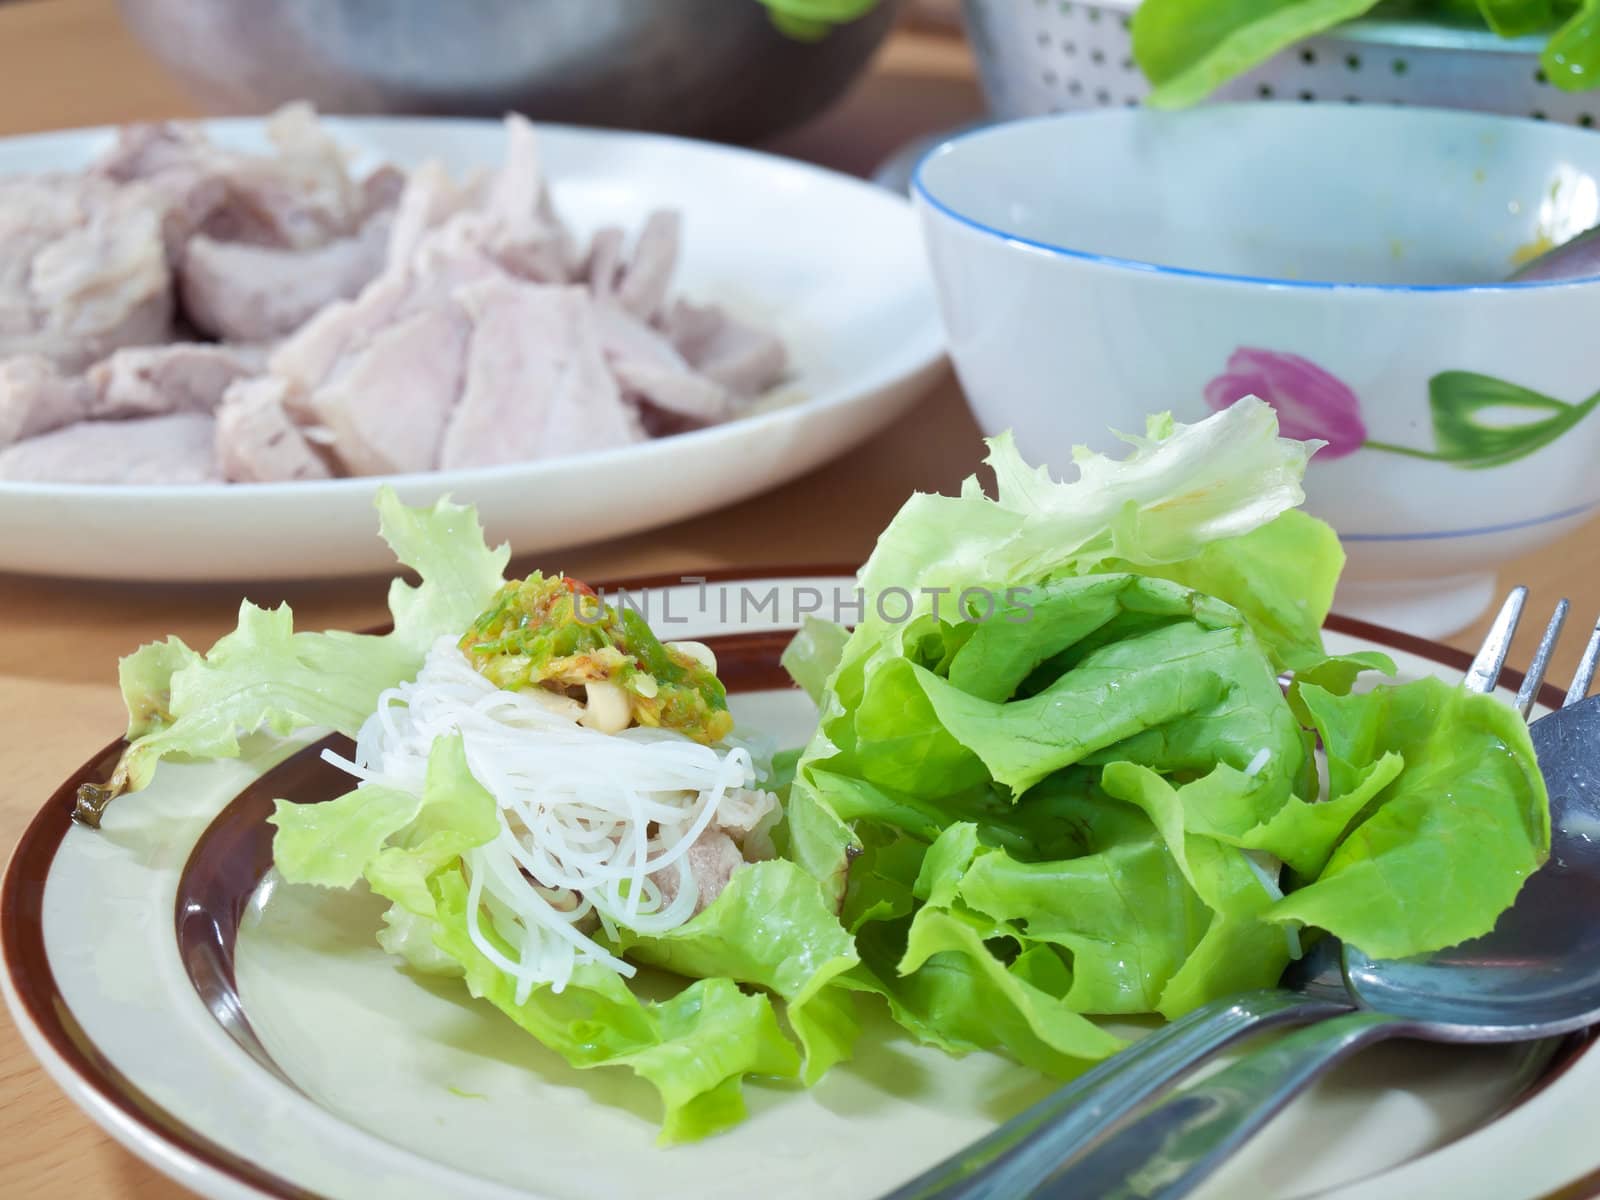 Thai style salad with leaf lettuce, noodle, slice boiling pork and spicy sauce